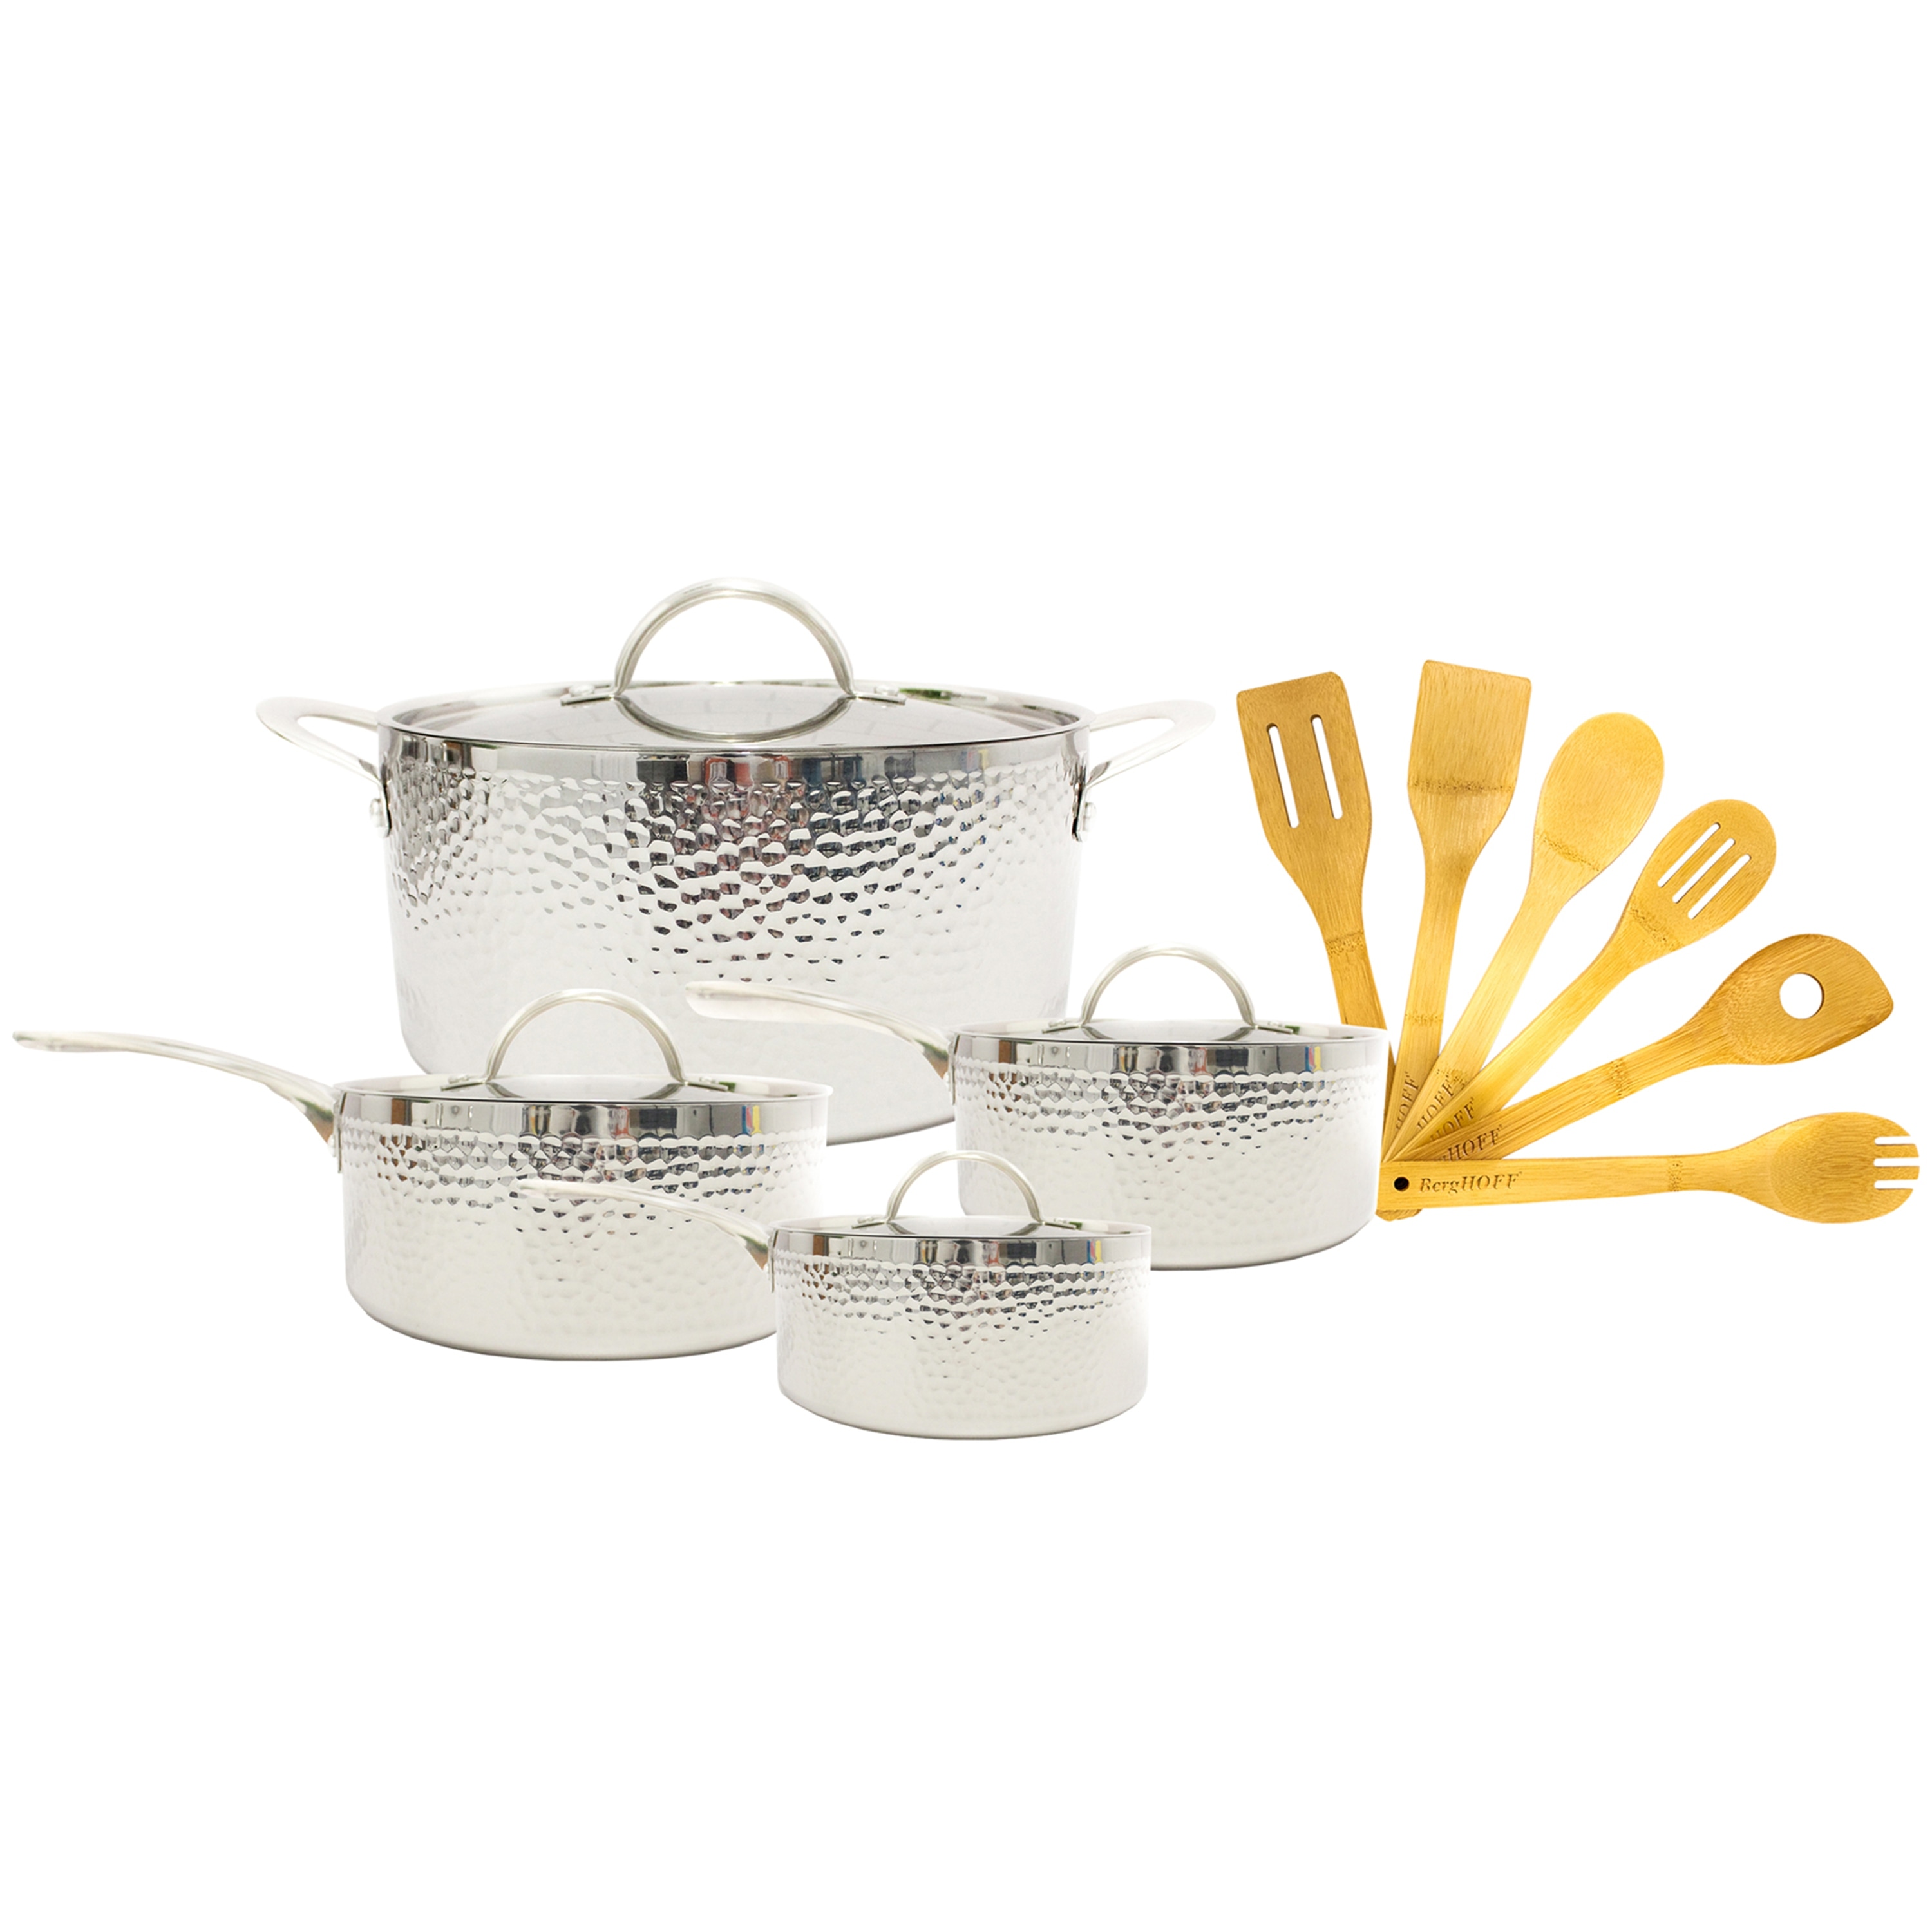 https://ak1.ostkcdn.com/images/products/is/images/direct/caa3f23d2b82de06c95e6ec590ea837cc0d590d1/Tri-Ply-18-10-SS-13pc-Cookware-Set%2C-Hammered.jpg